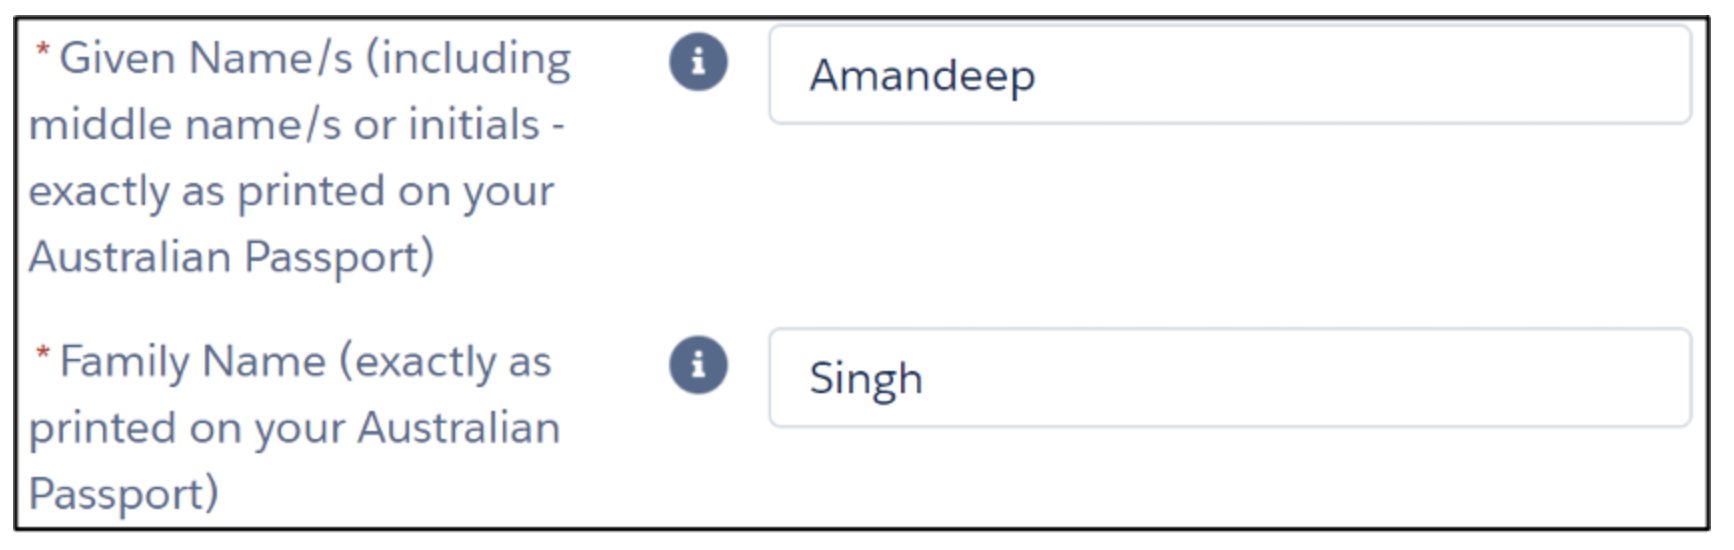 Split your name between the Given Name and Family Name fields.